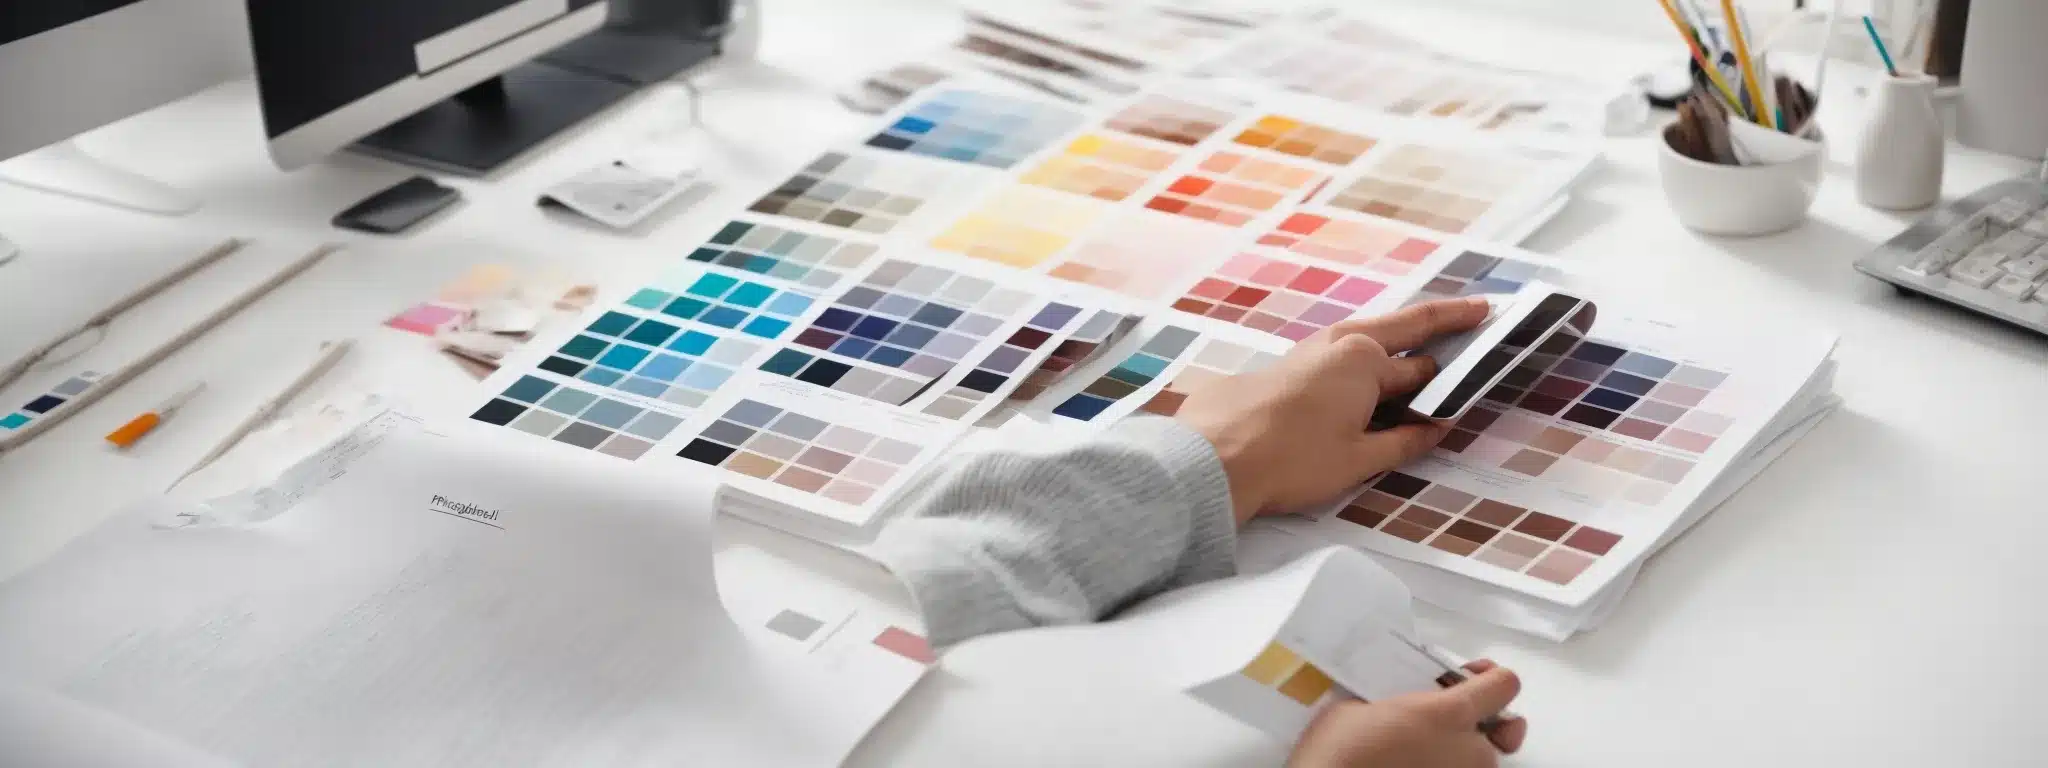 A Designer Thoughtfully Selecting Color Swatches And Sketching A Minimalist Logo On A Clean, Bright Workspace.